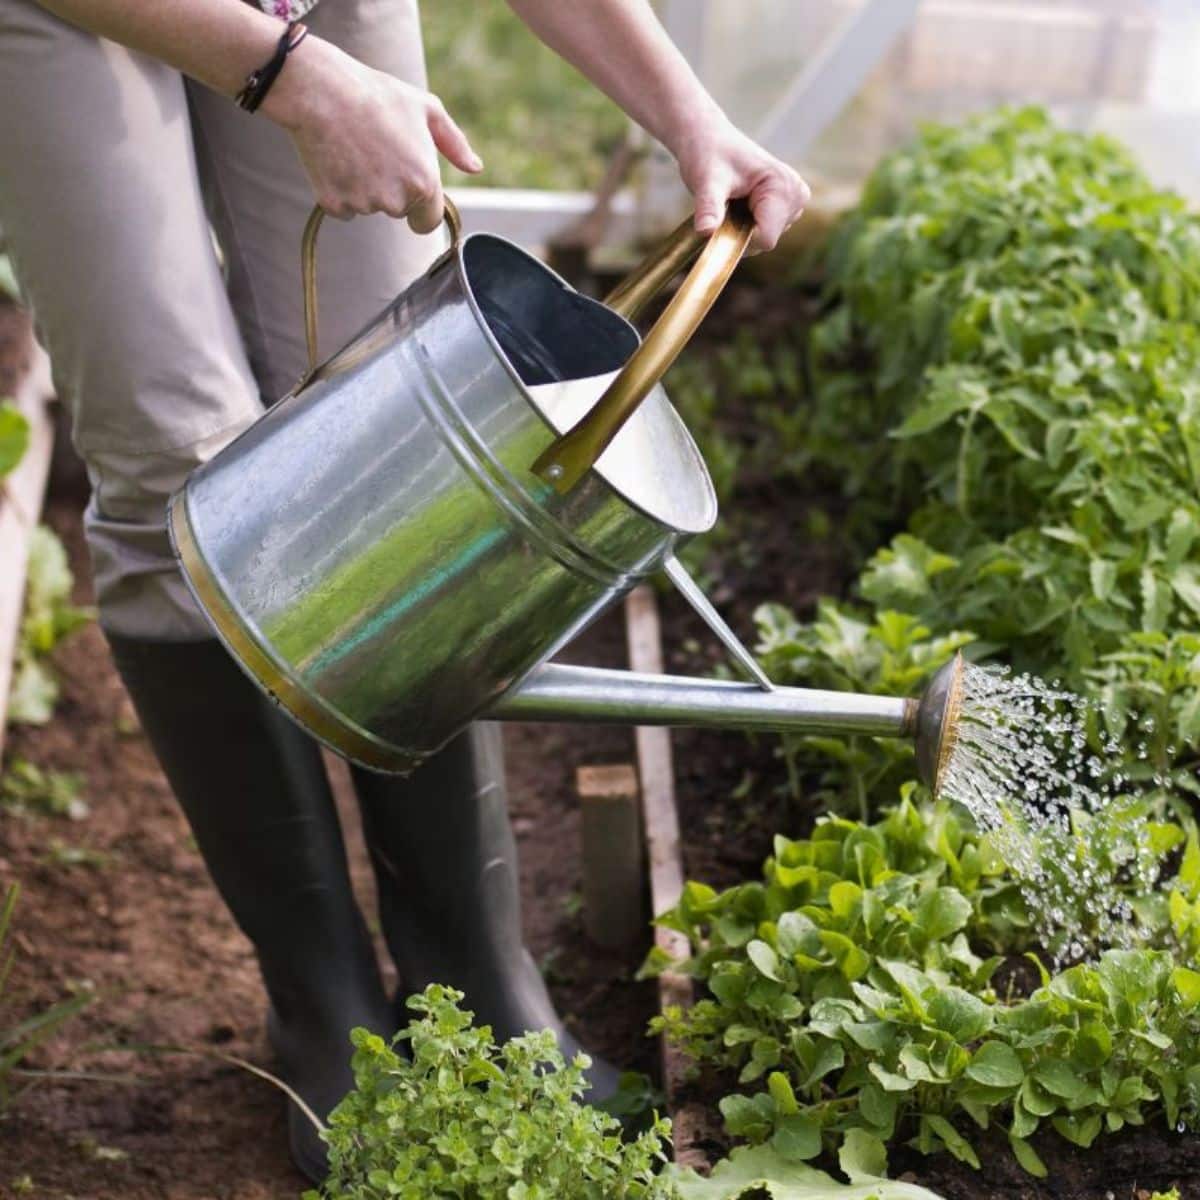 A gardener watering plants with a metal watering can.